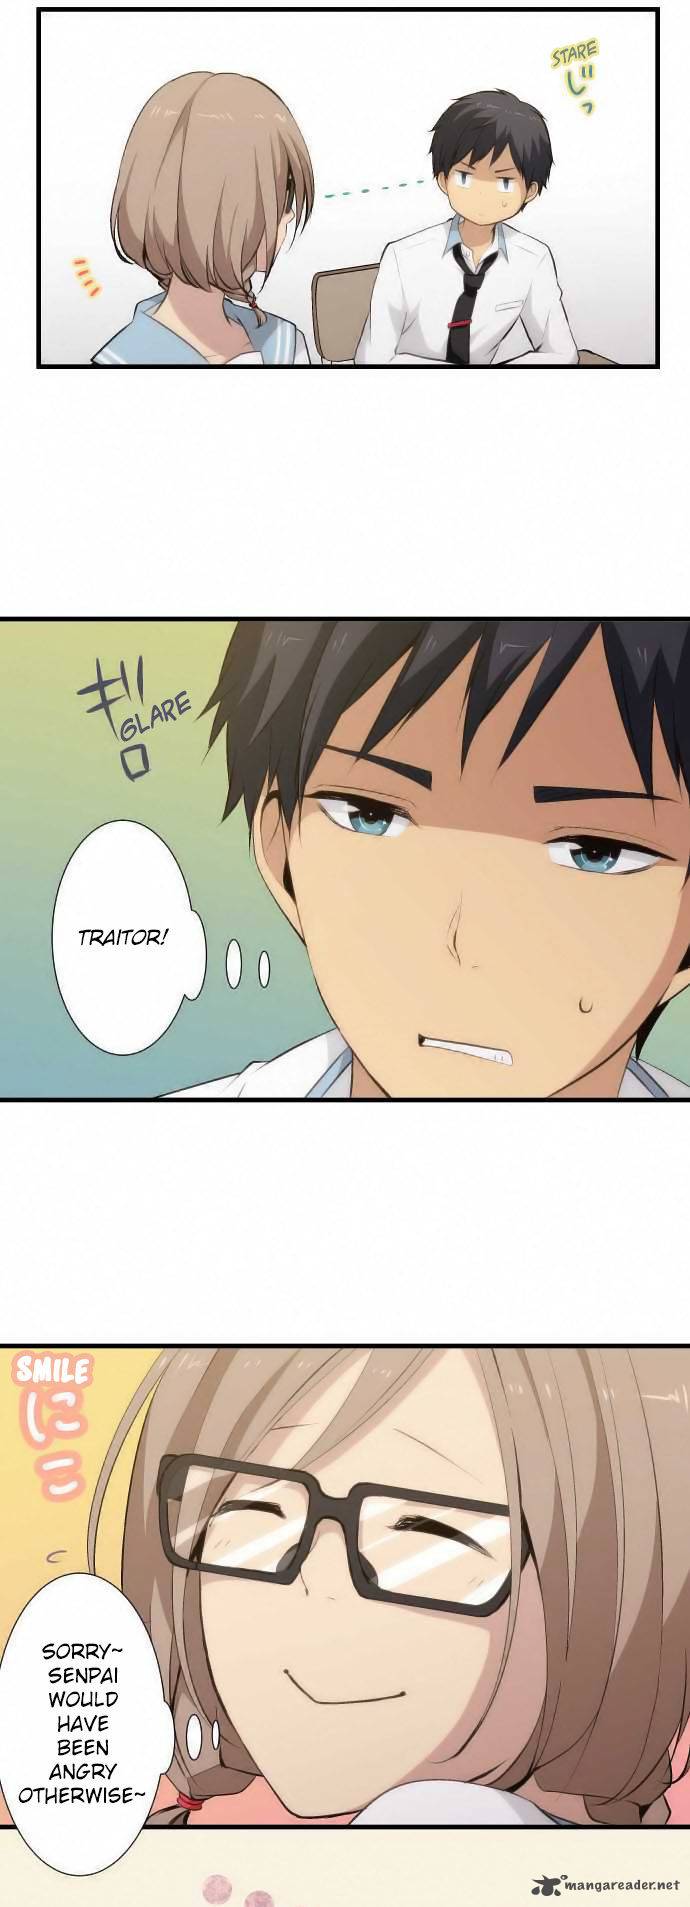 Relife 57 6